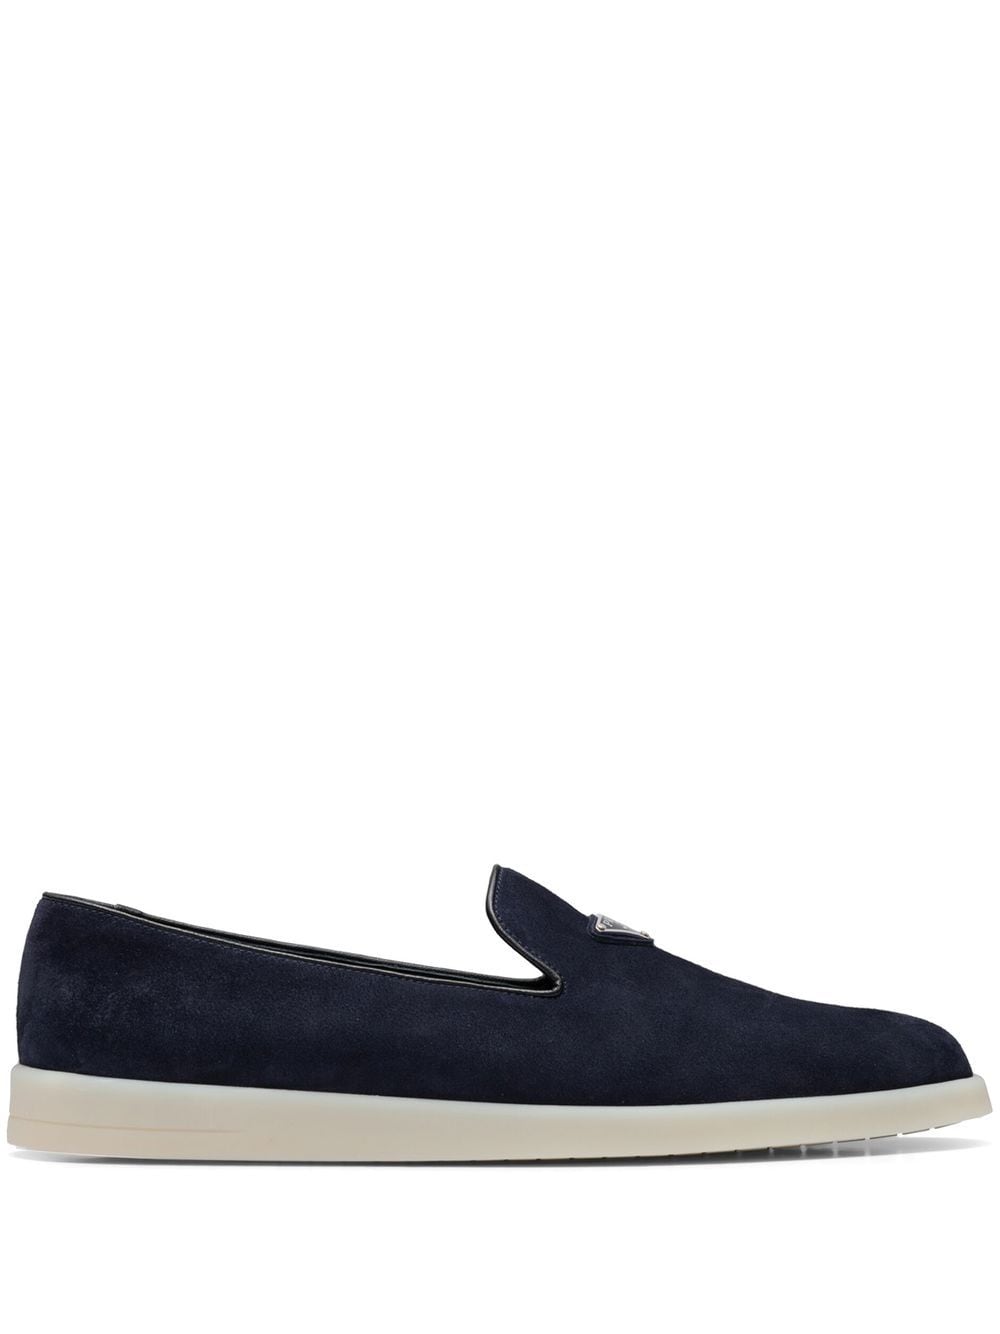 Image 1 of Prada triangle-patch suede loafers